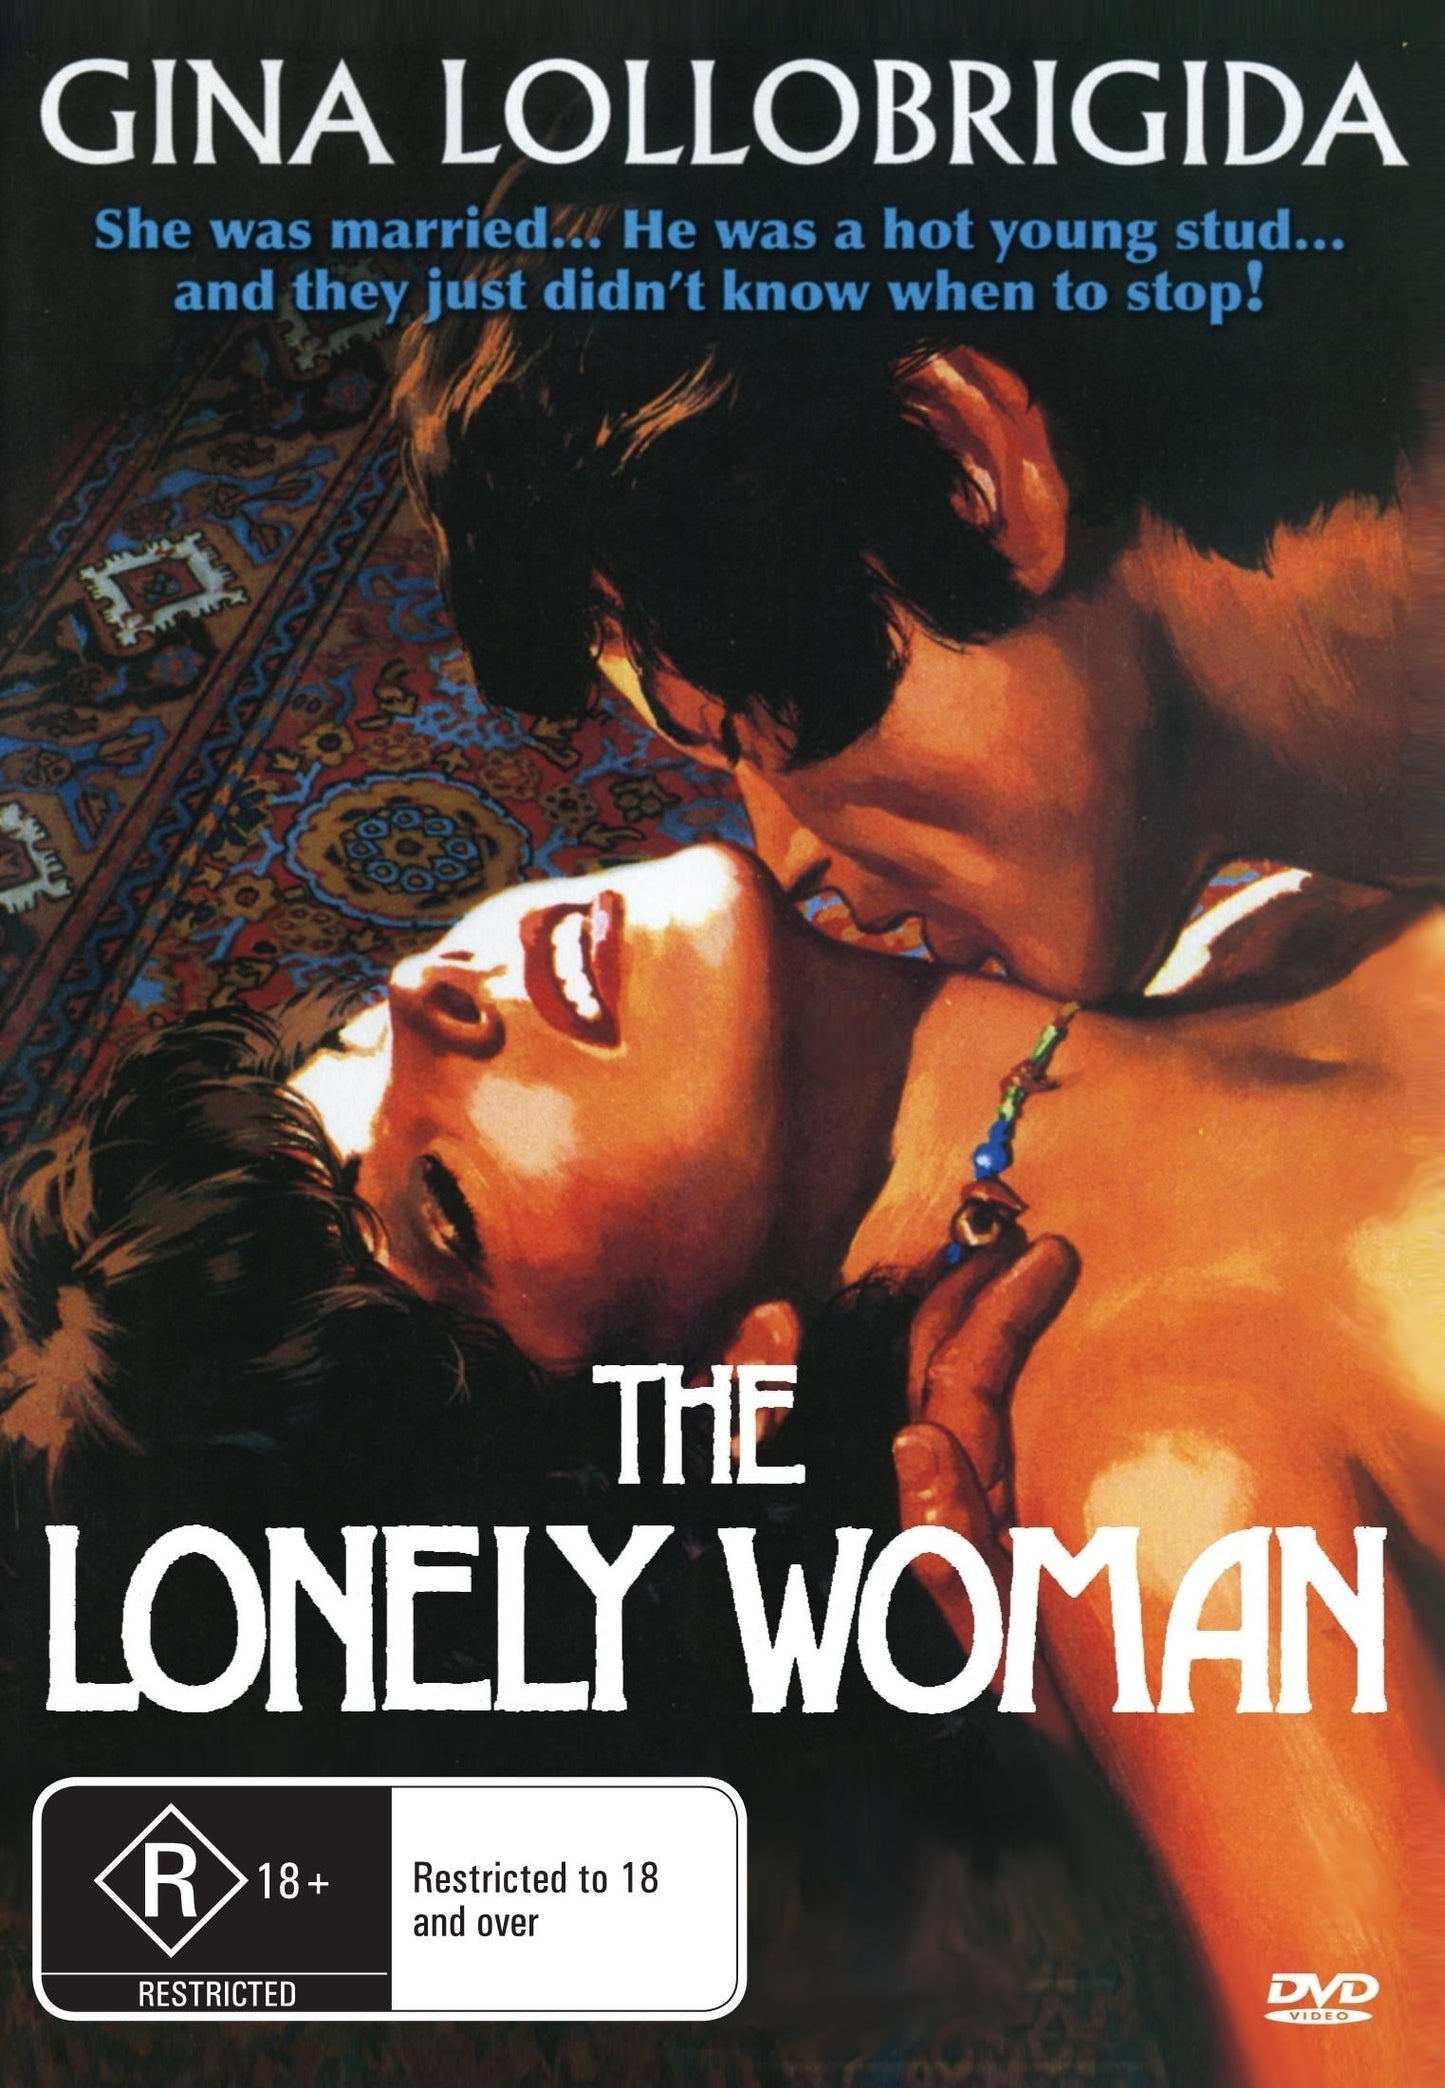 The Lonely Woman rareandcollectibledvds